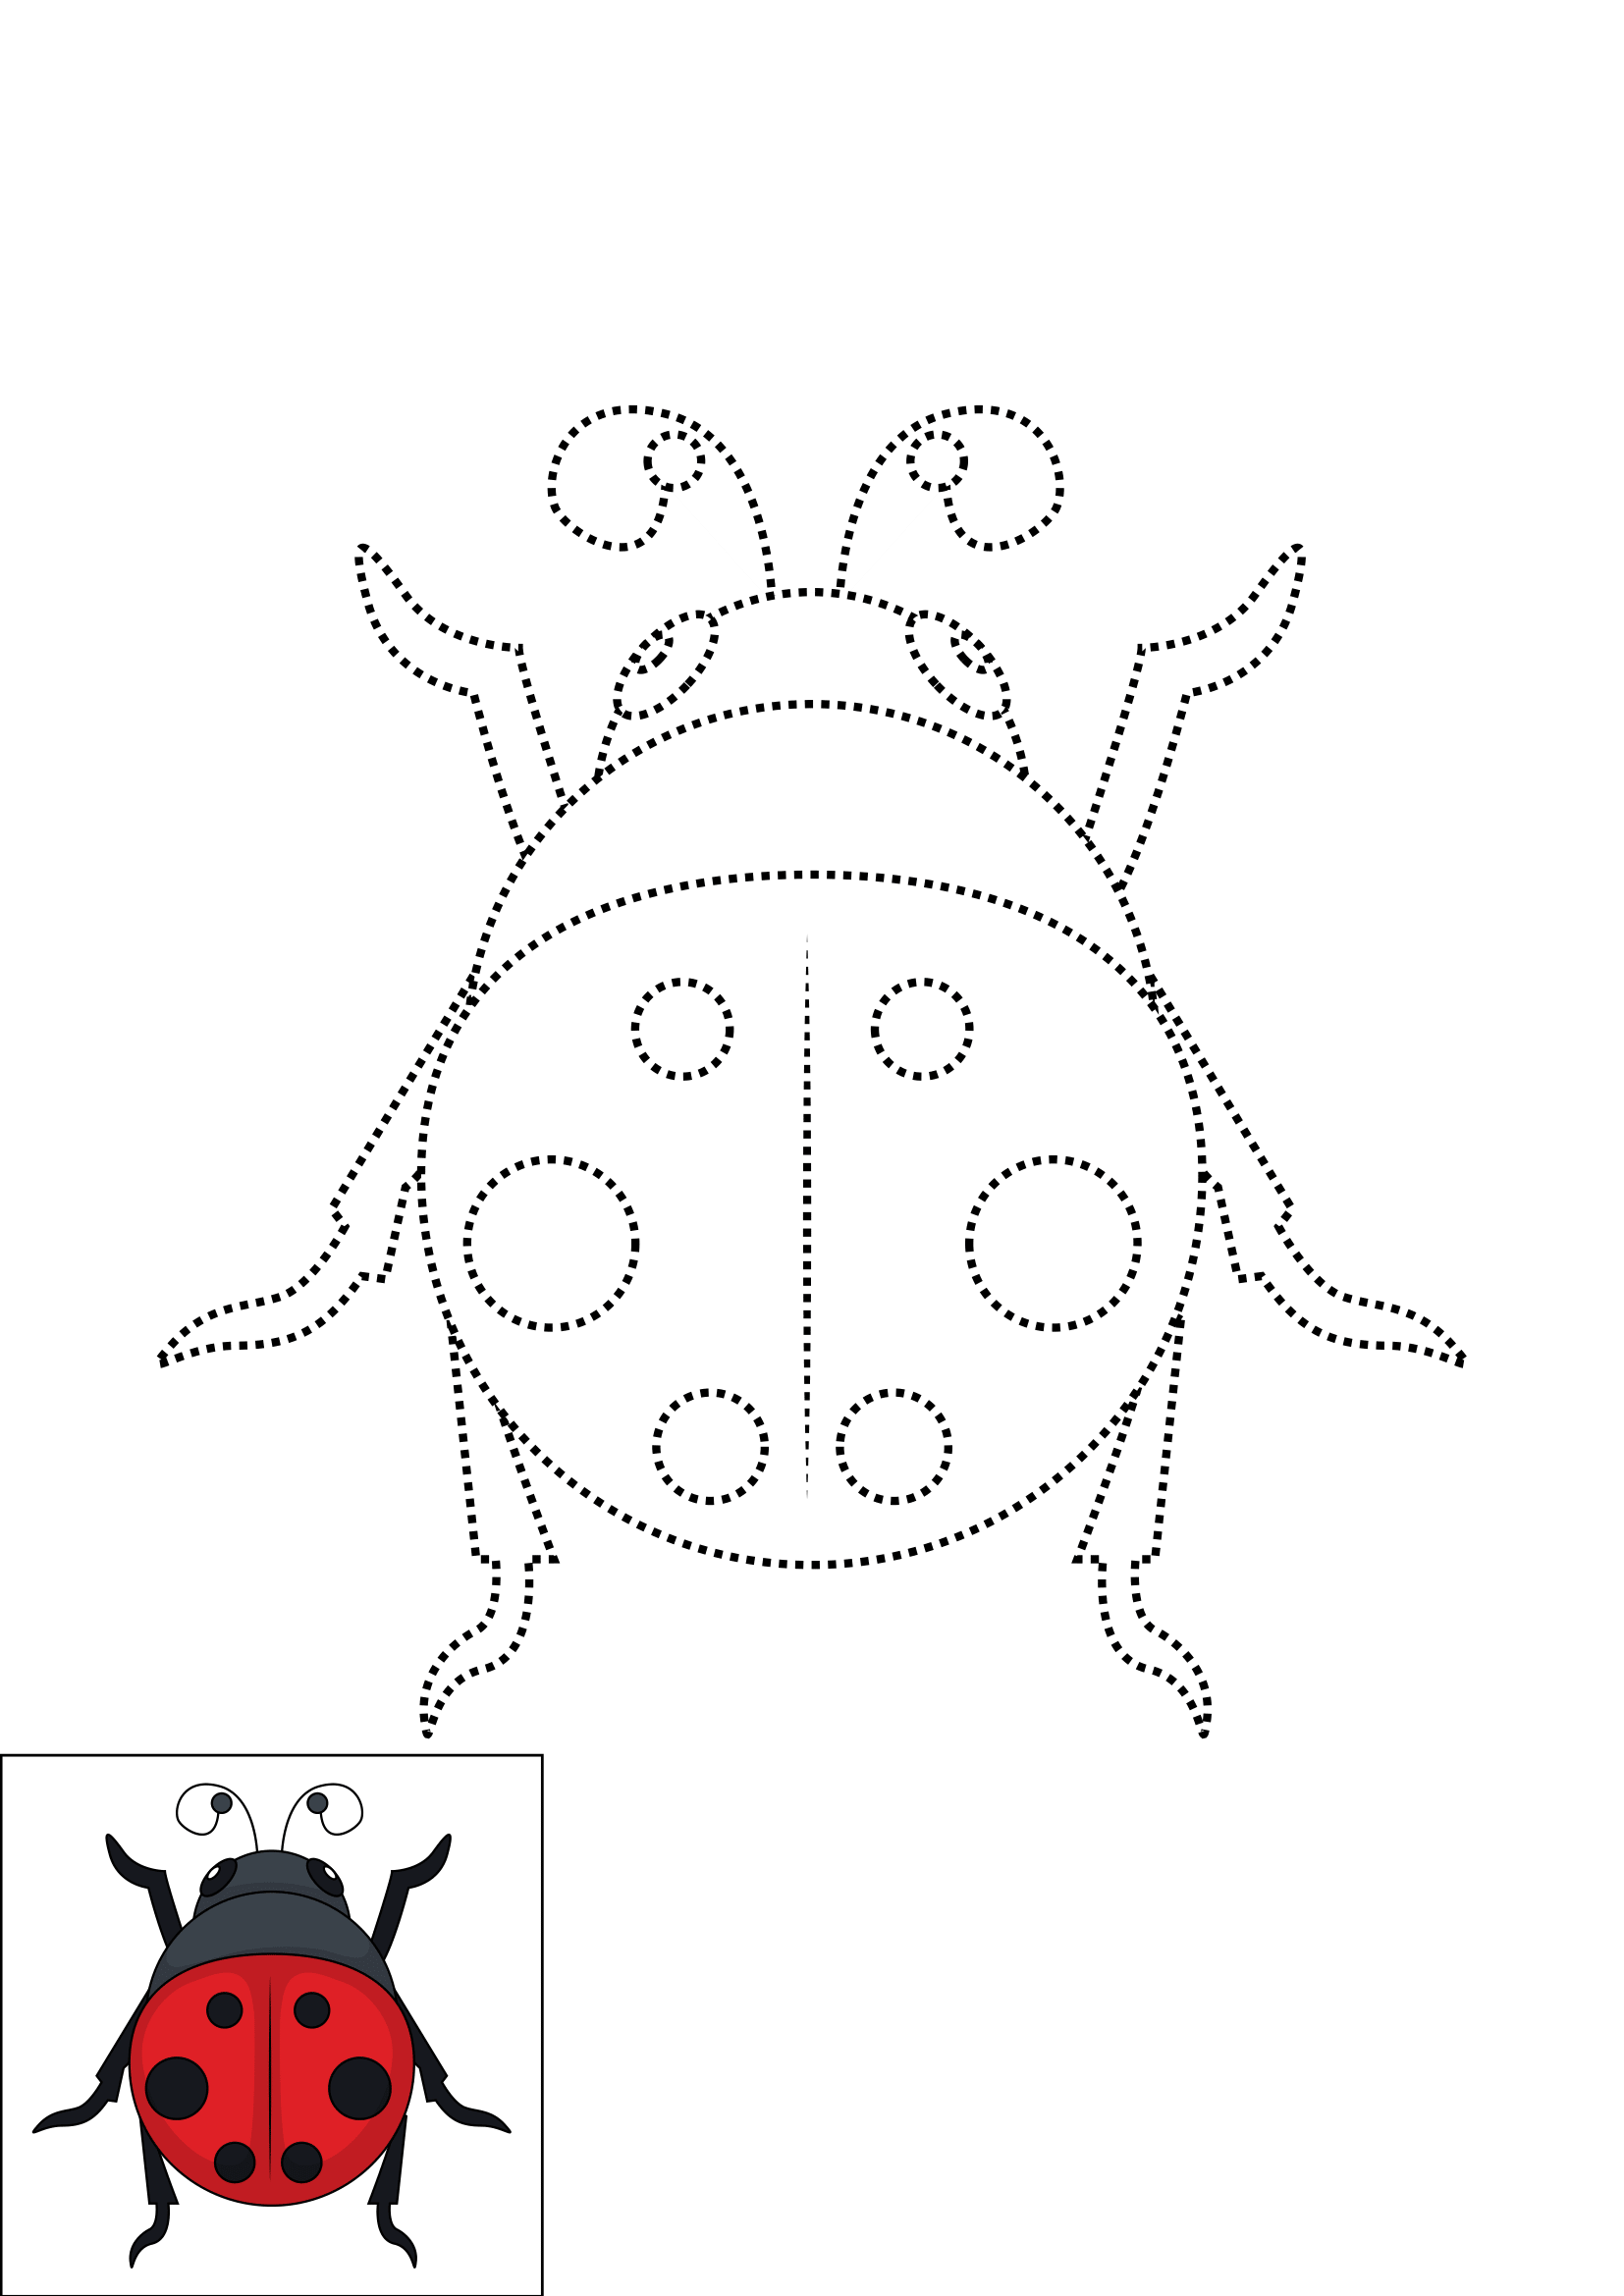 How to Draw A Ladybug Step by Step Printable Dotted